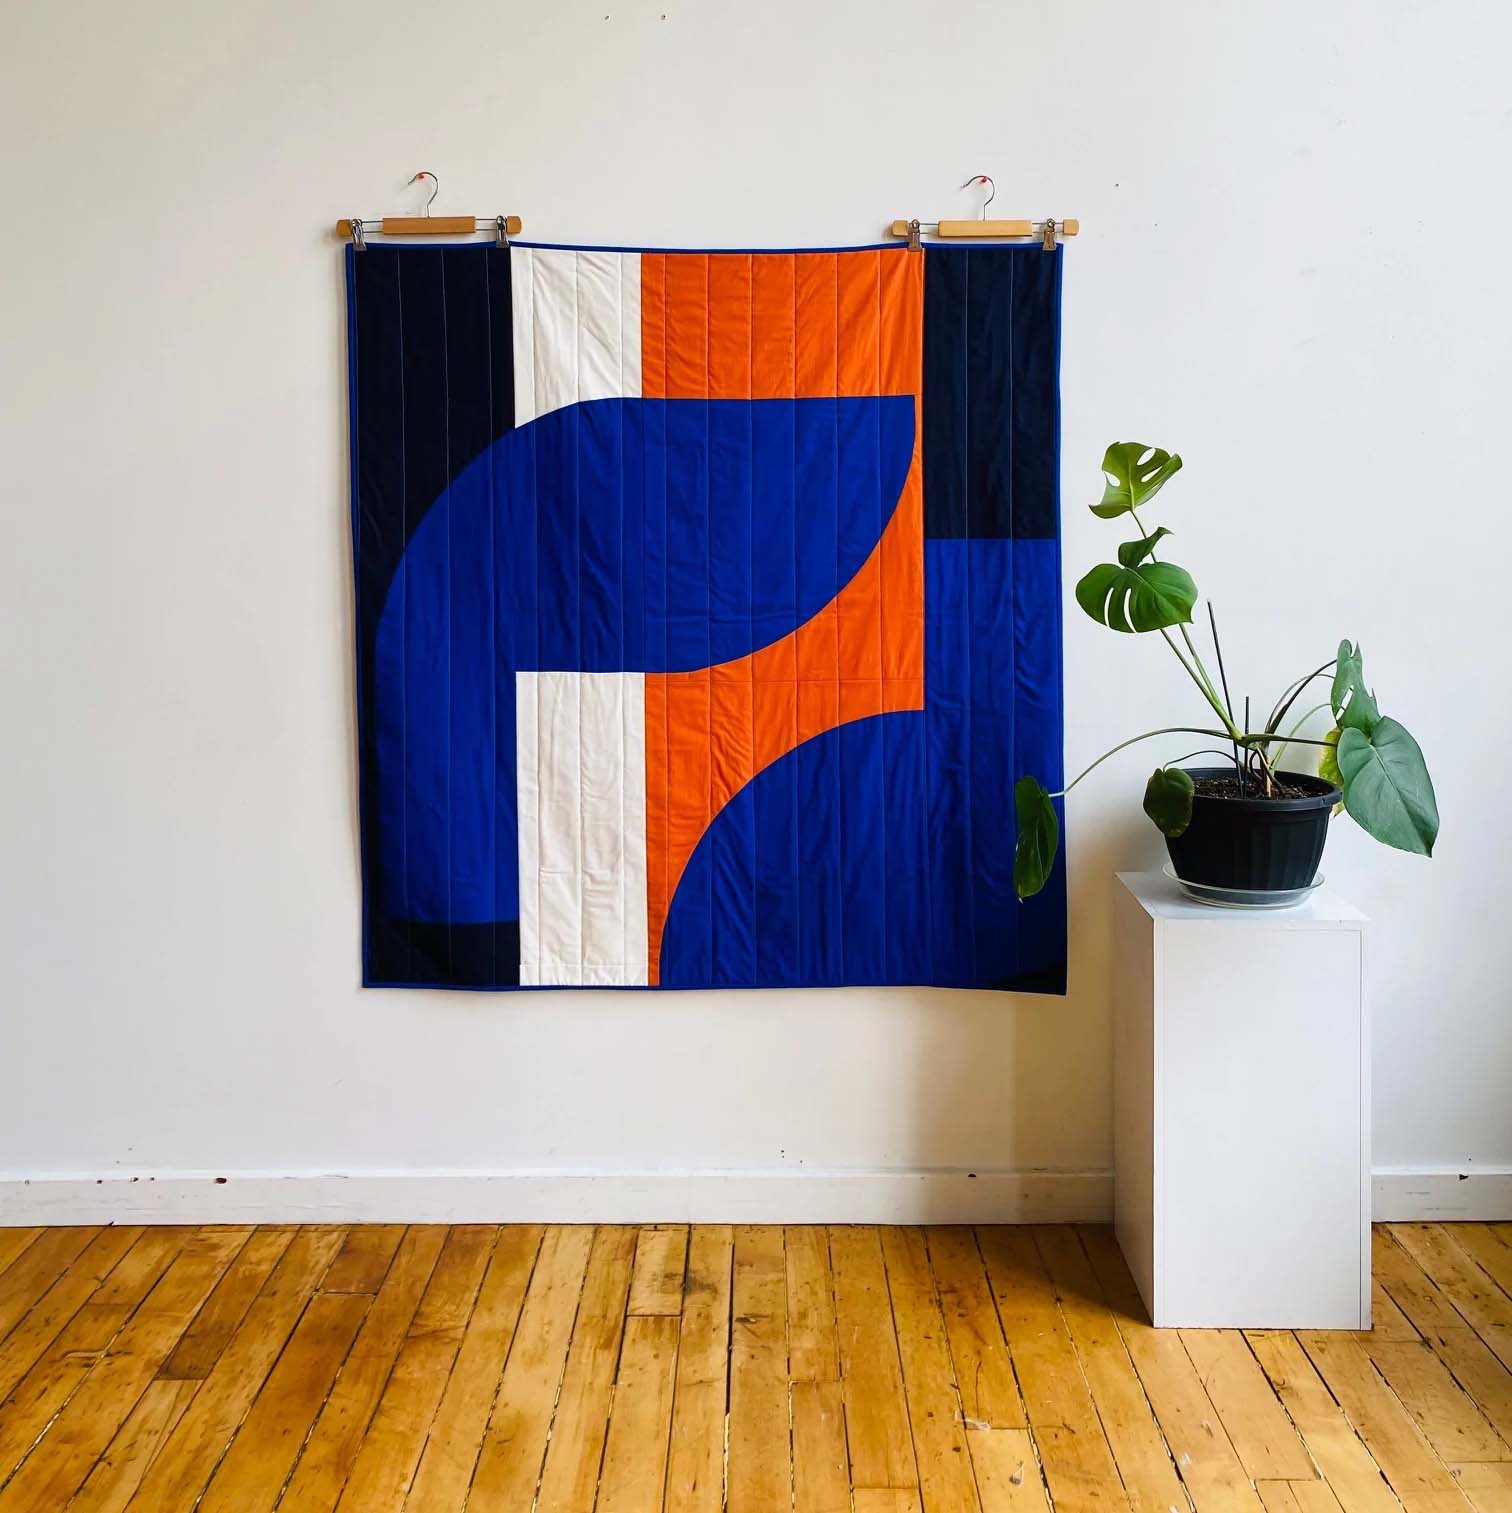 Abstract quilt in blue, orange, black and white hanging on white wall